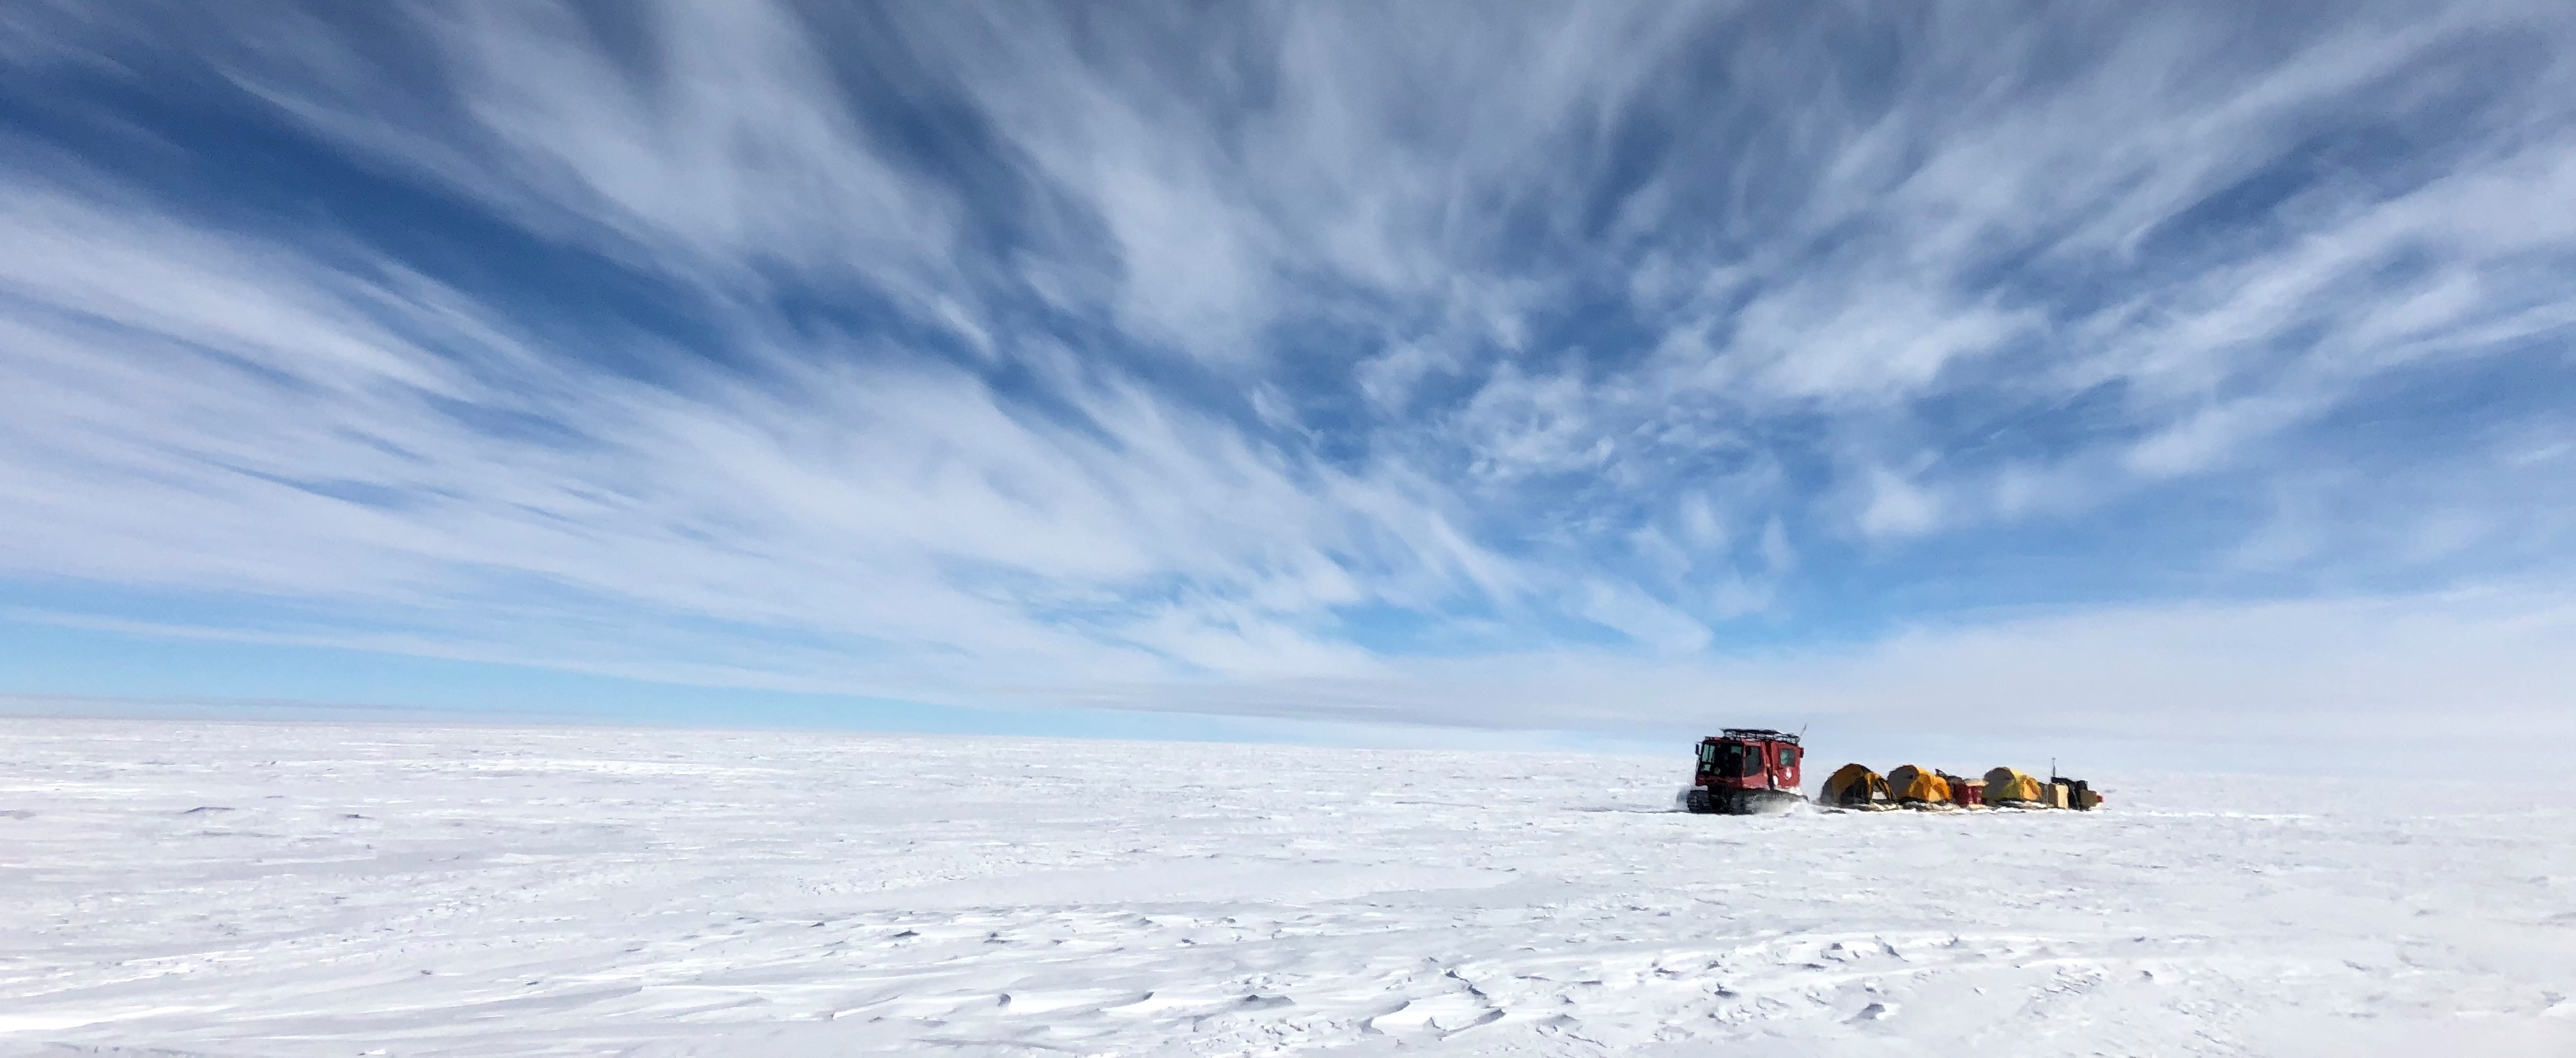 A panoramic photo of the Antarctic landscape, with a large red vehicle towing a chain of supply barges across the windswept white snow. The sky is deep blue with streaky clouds radiating across it.